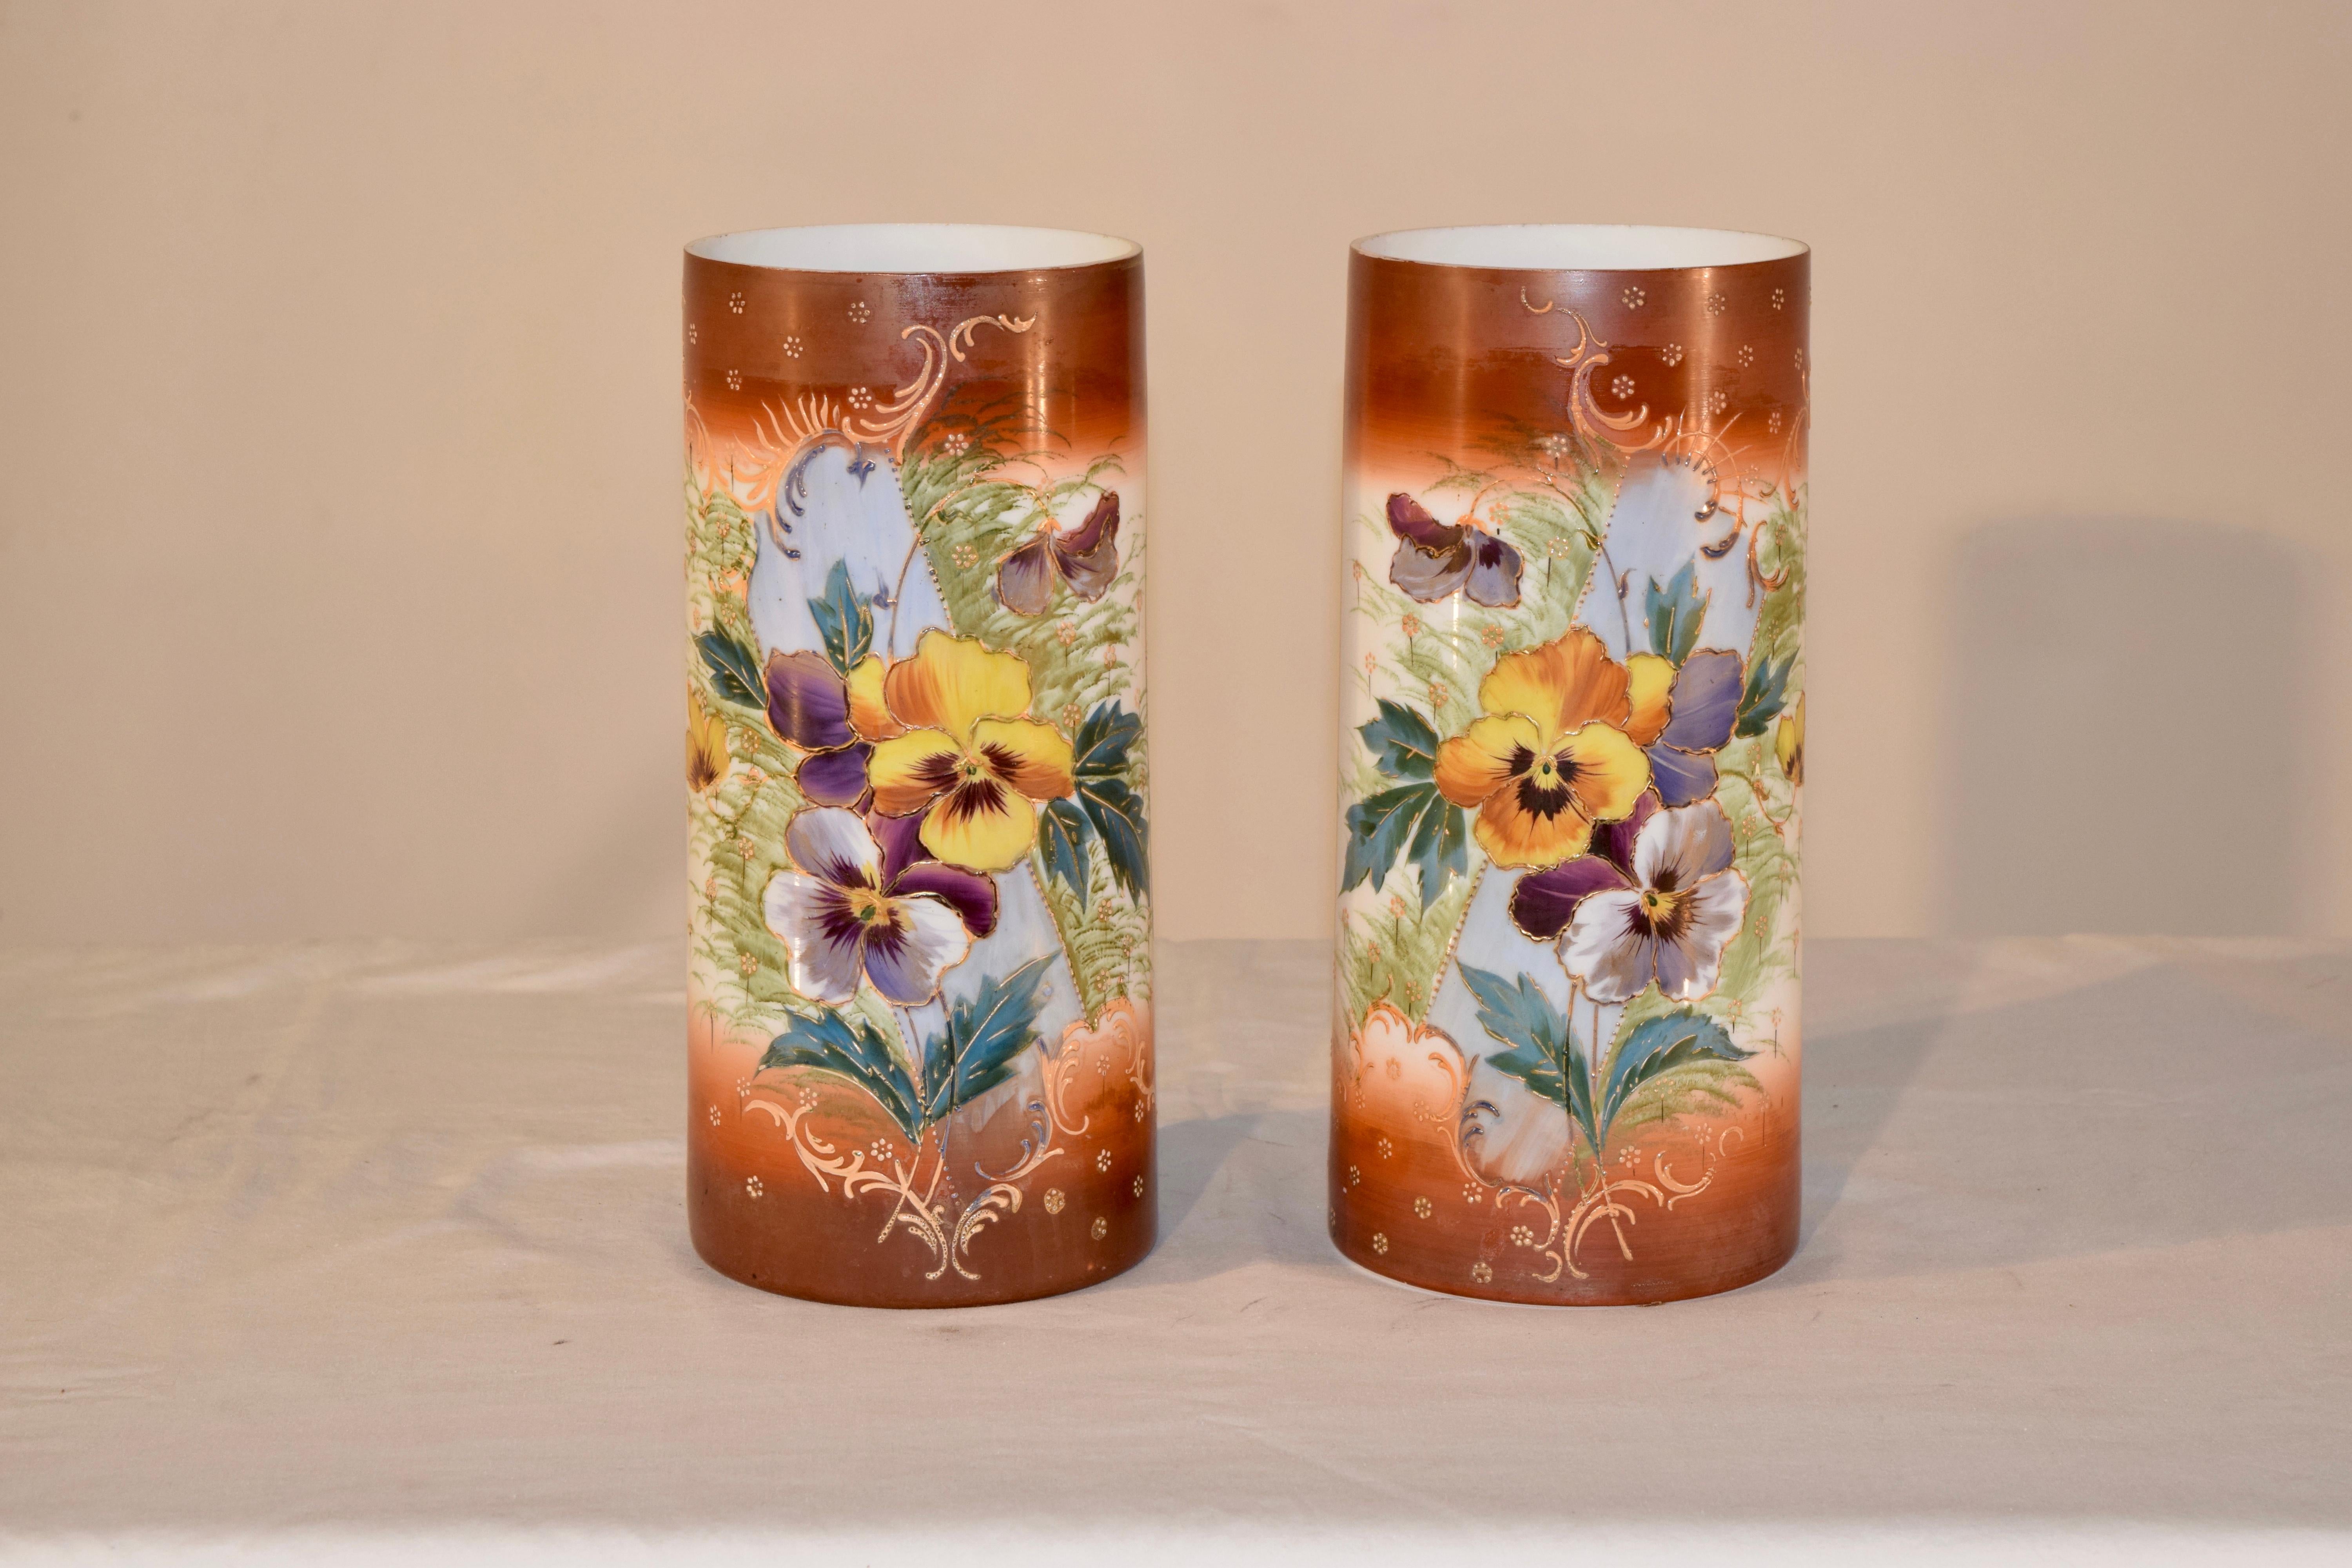 Pair of cylindrical opaline glass vases from France with lovely borders of a warm rust coloring surrounding lovely hand painted pansies and leaves on the front of the vases. There is hand painted gilt accenting as well.